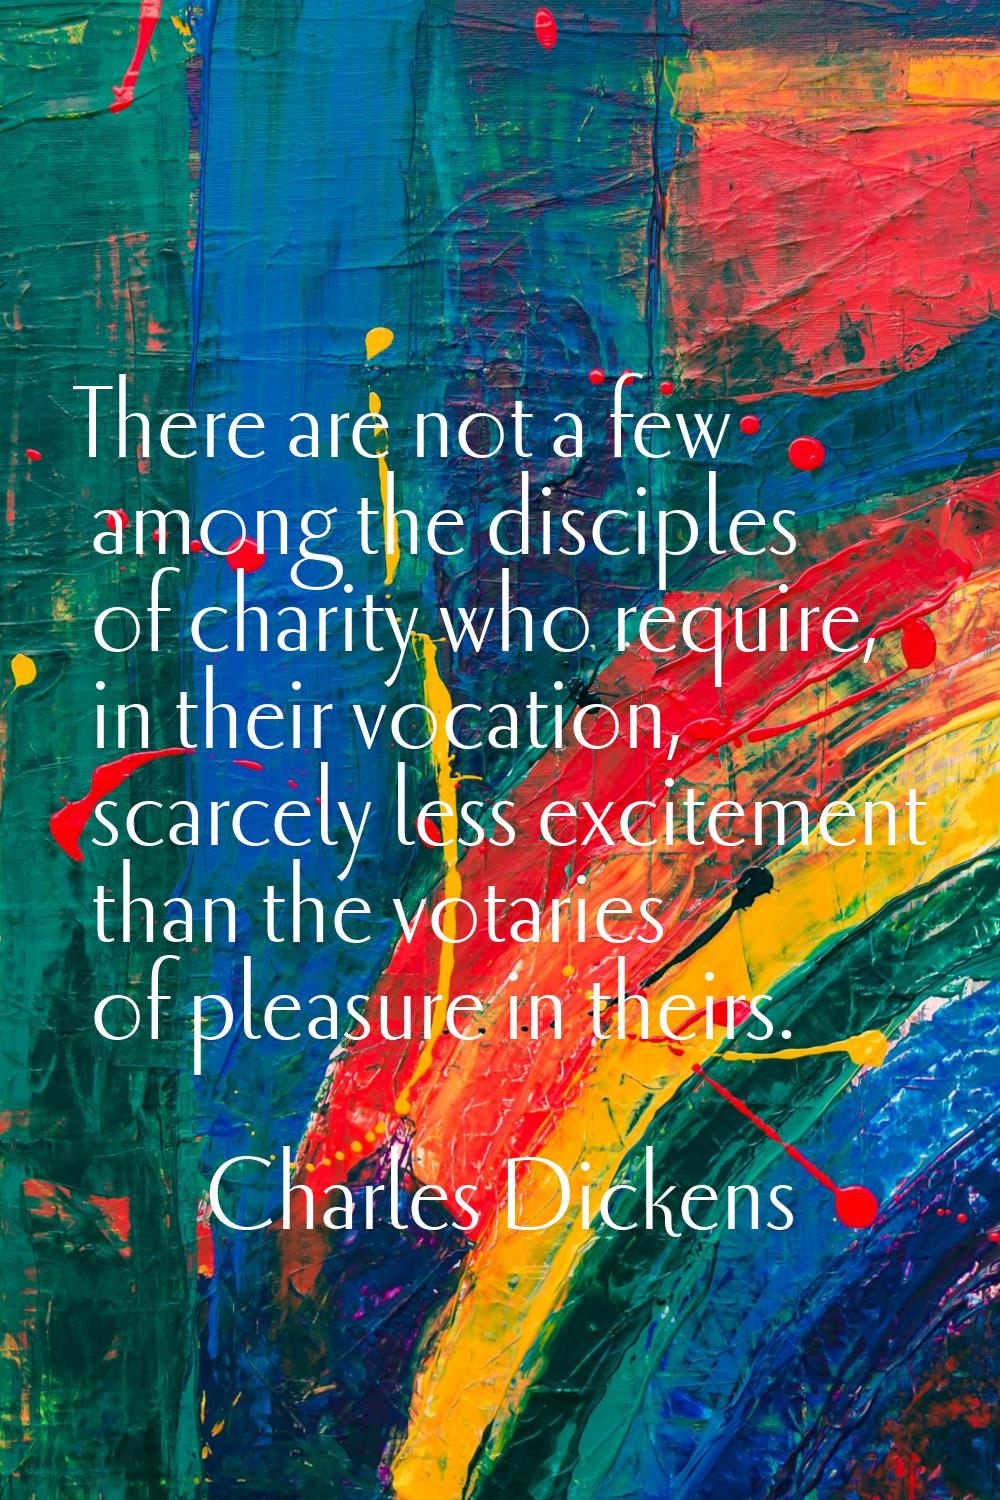 There are not a few among the disciples of charity who require, in their vocation, scarcely less ex